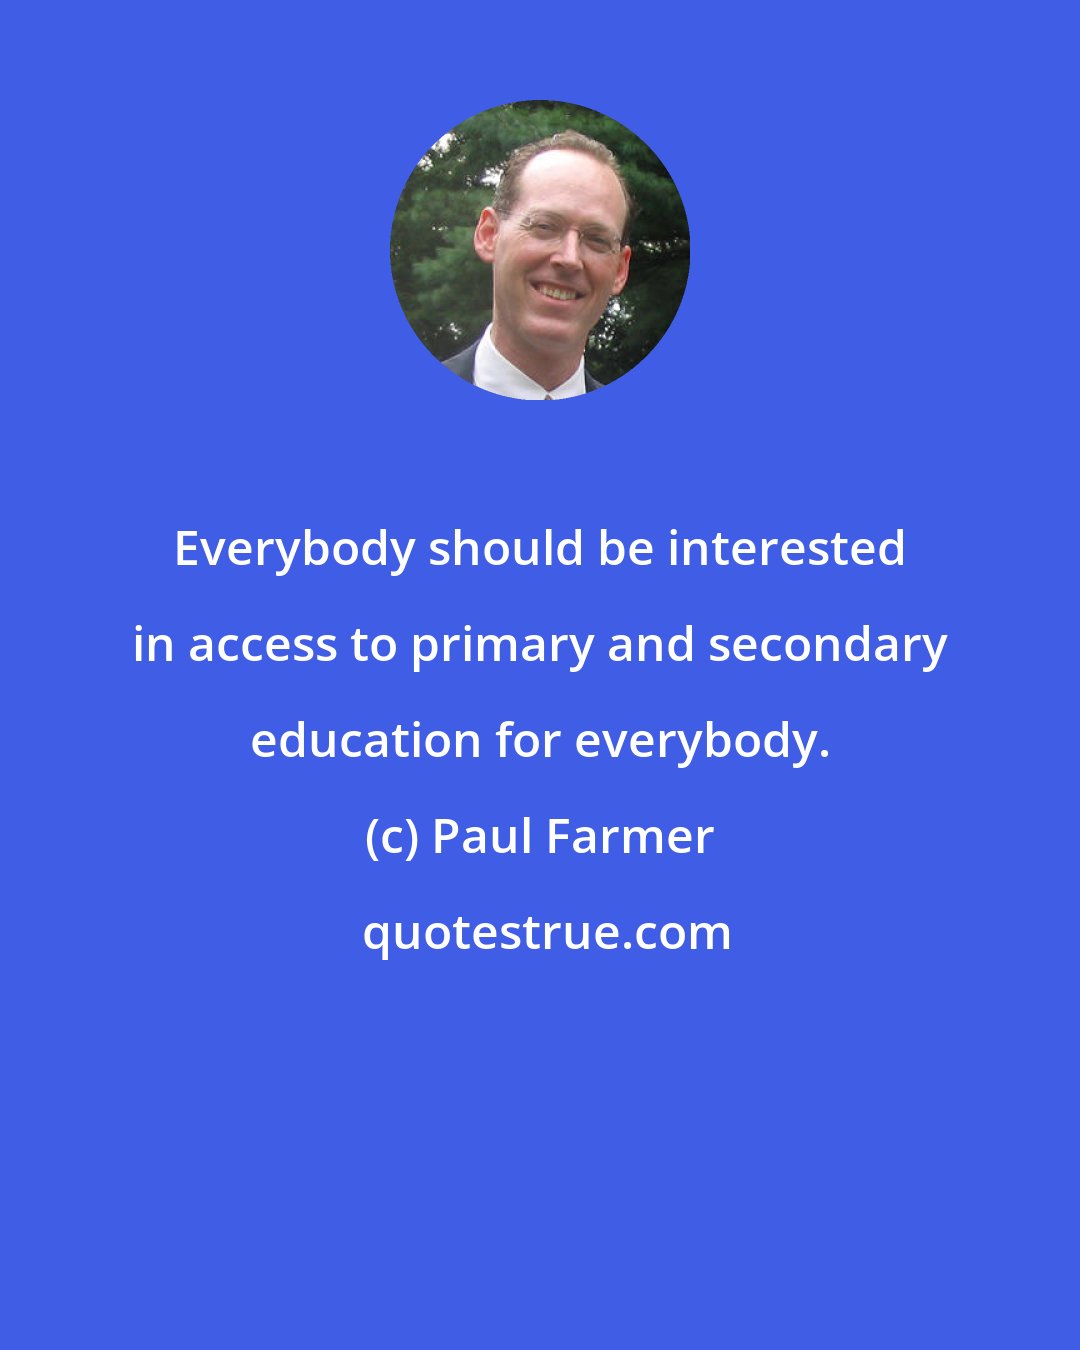 Paul Farmer: Everybody should be interested in access to primary and secondary education for everybody.